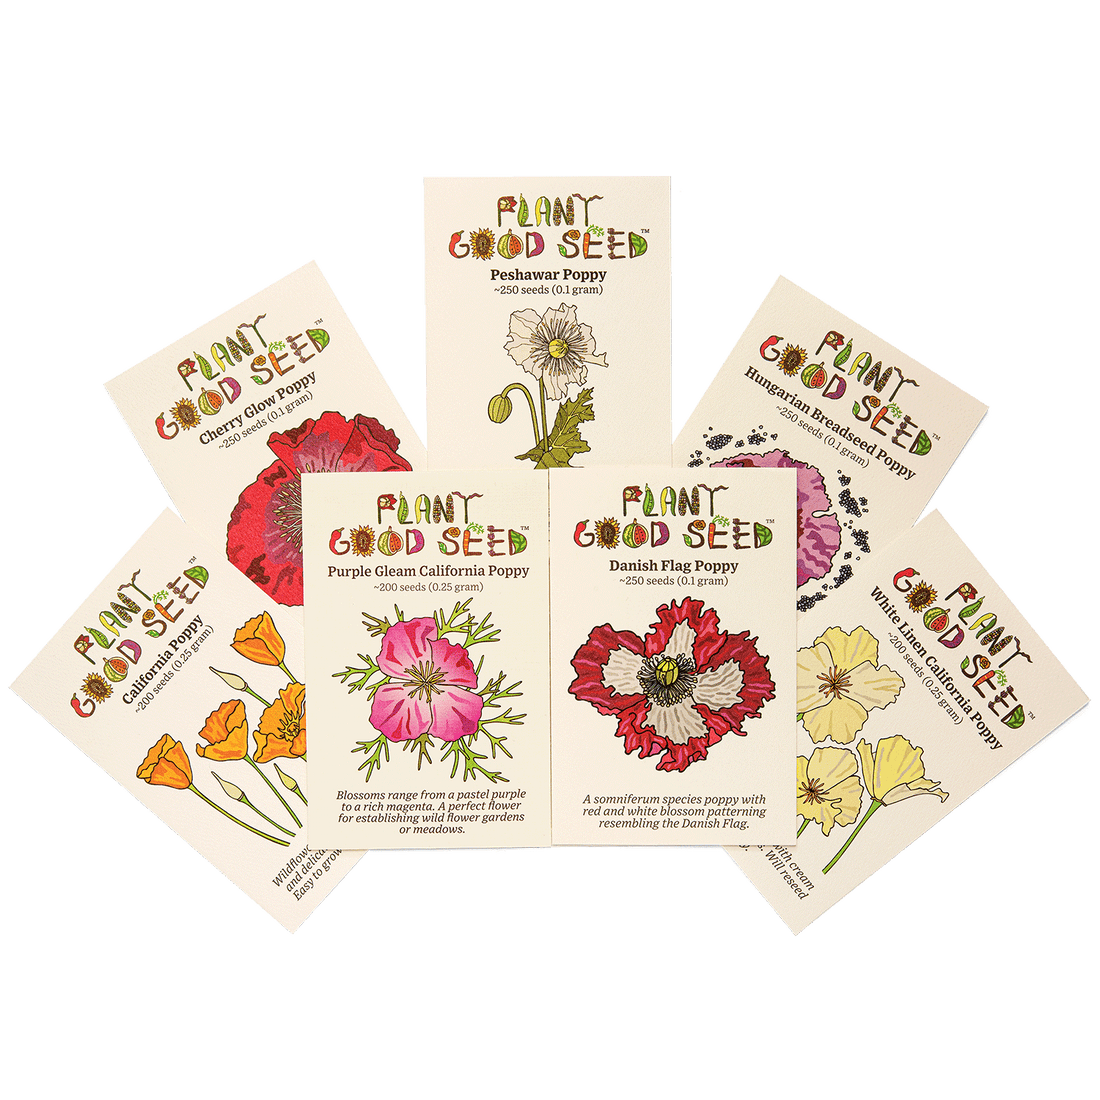 Seed Collections - The Plant Good Seed Company